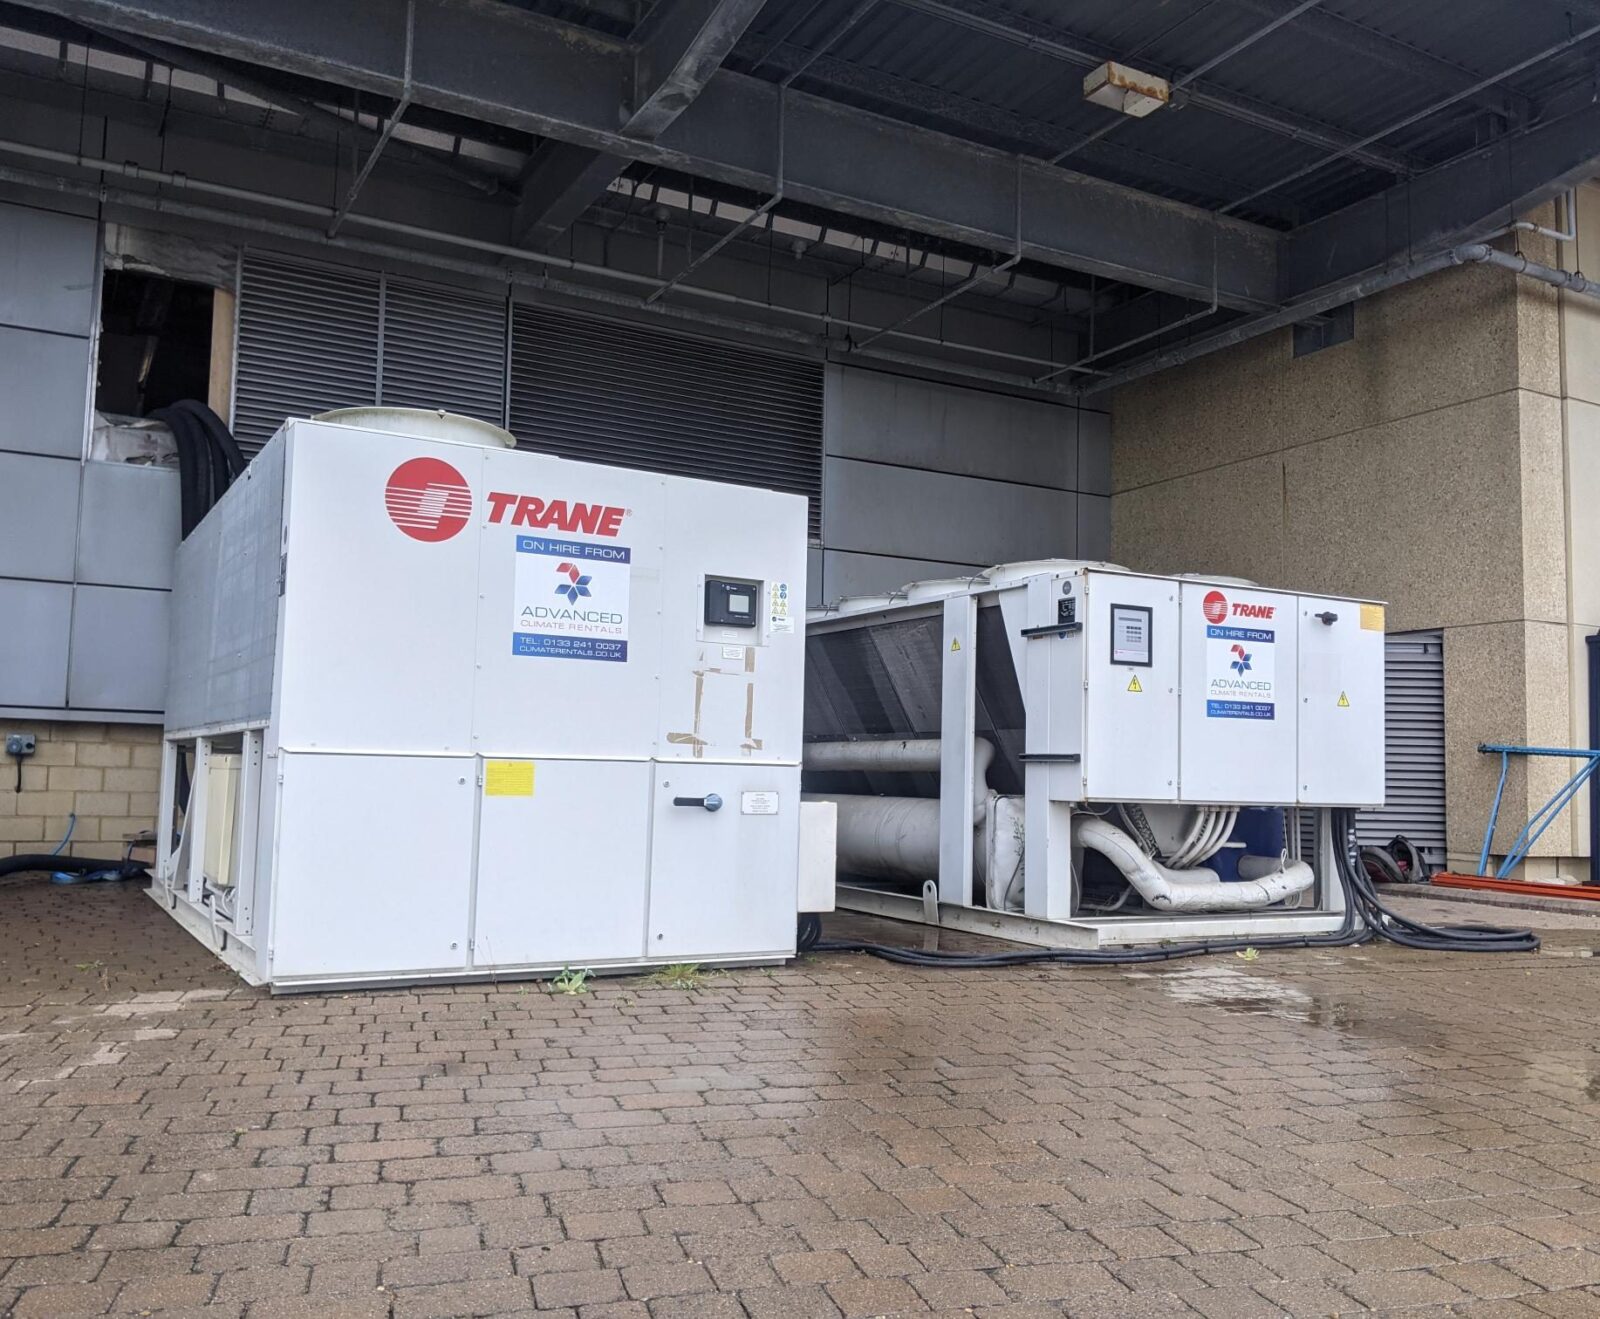 Trane hire chillers installed for 1mw of cooling for pharmaceutical process and comfort cooling in kent.